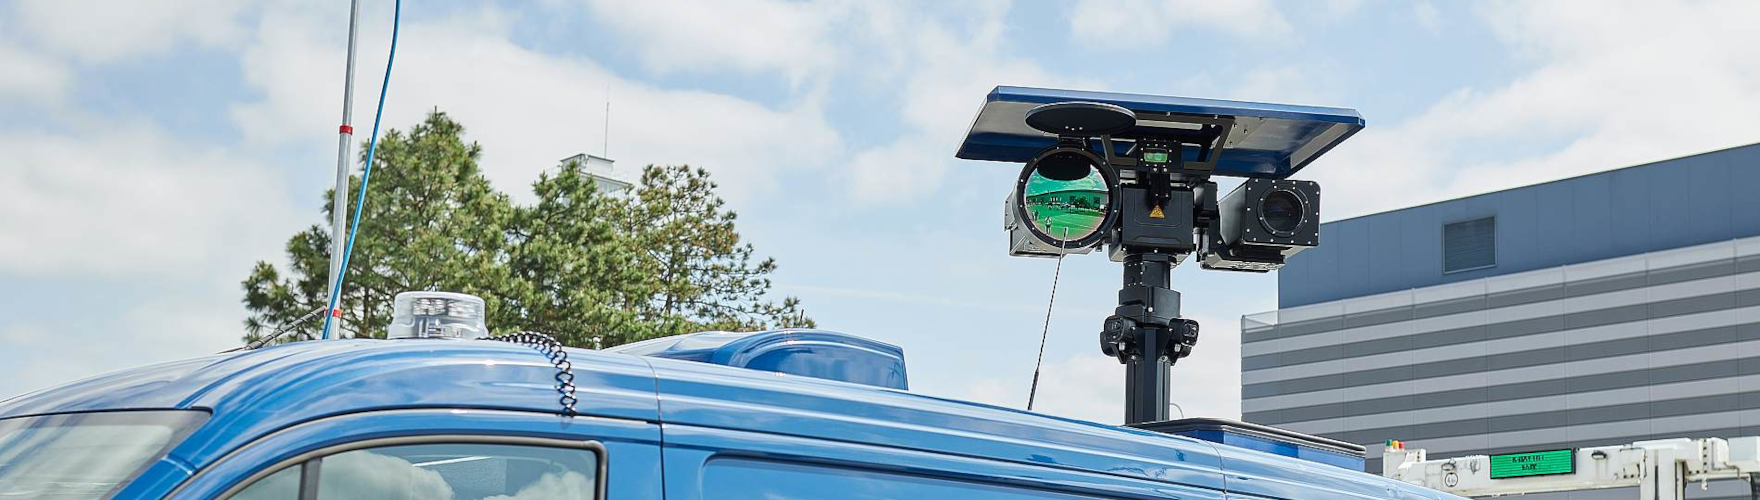 Read about us: Reliable surveillance vehicles save police time and money